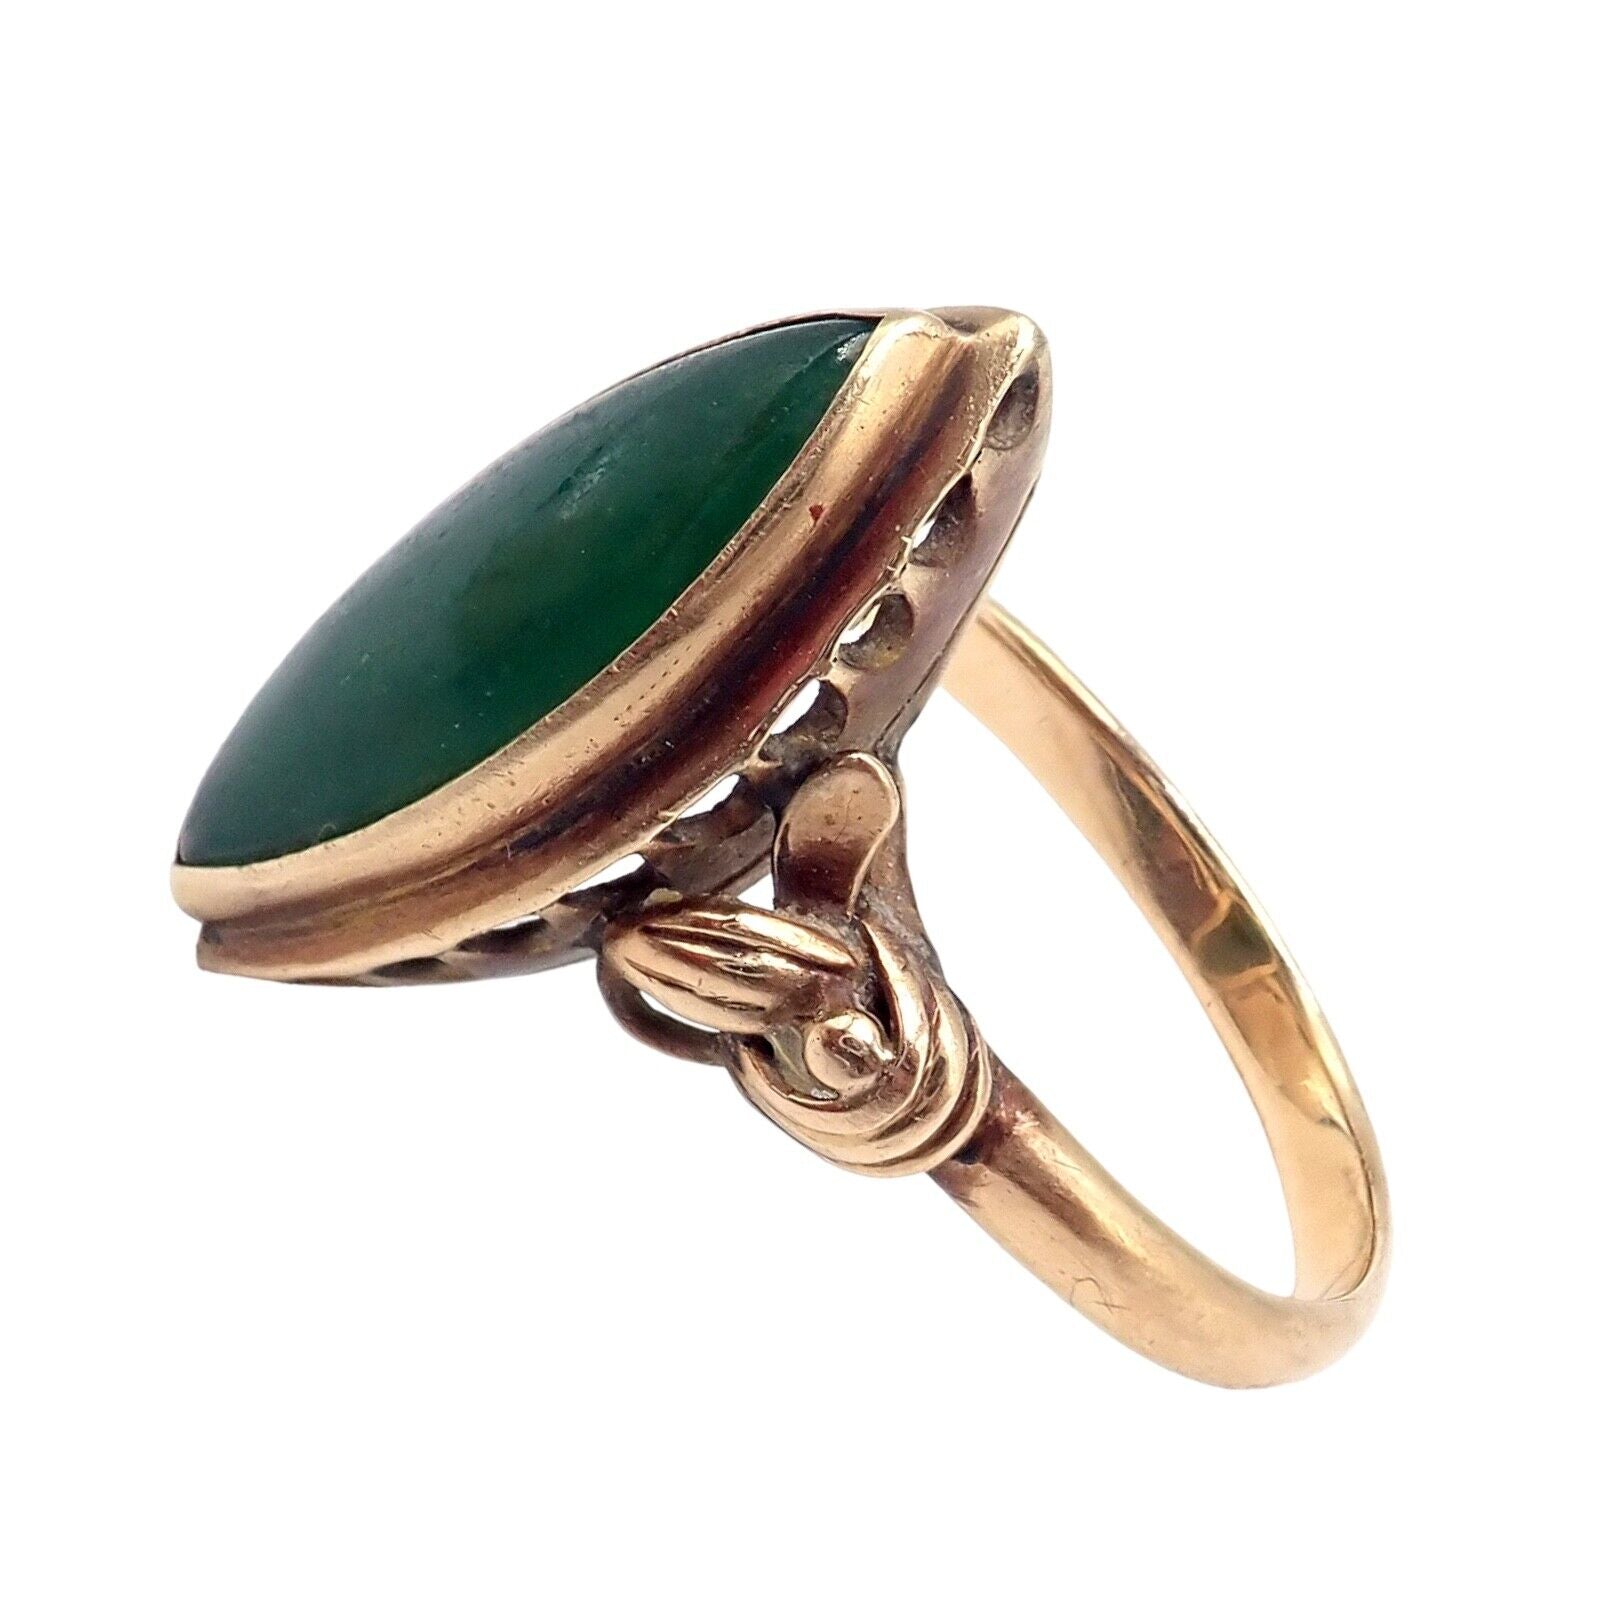 Lot - ANTIQUE LADIES GOLD TONE RING WITH GREEN STONE. 1.7 GRAMS,  APPROXIMATE SIZE M. HALLMARKS WORN